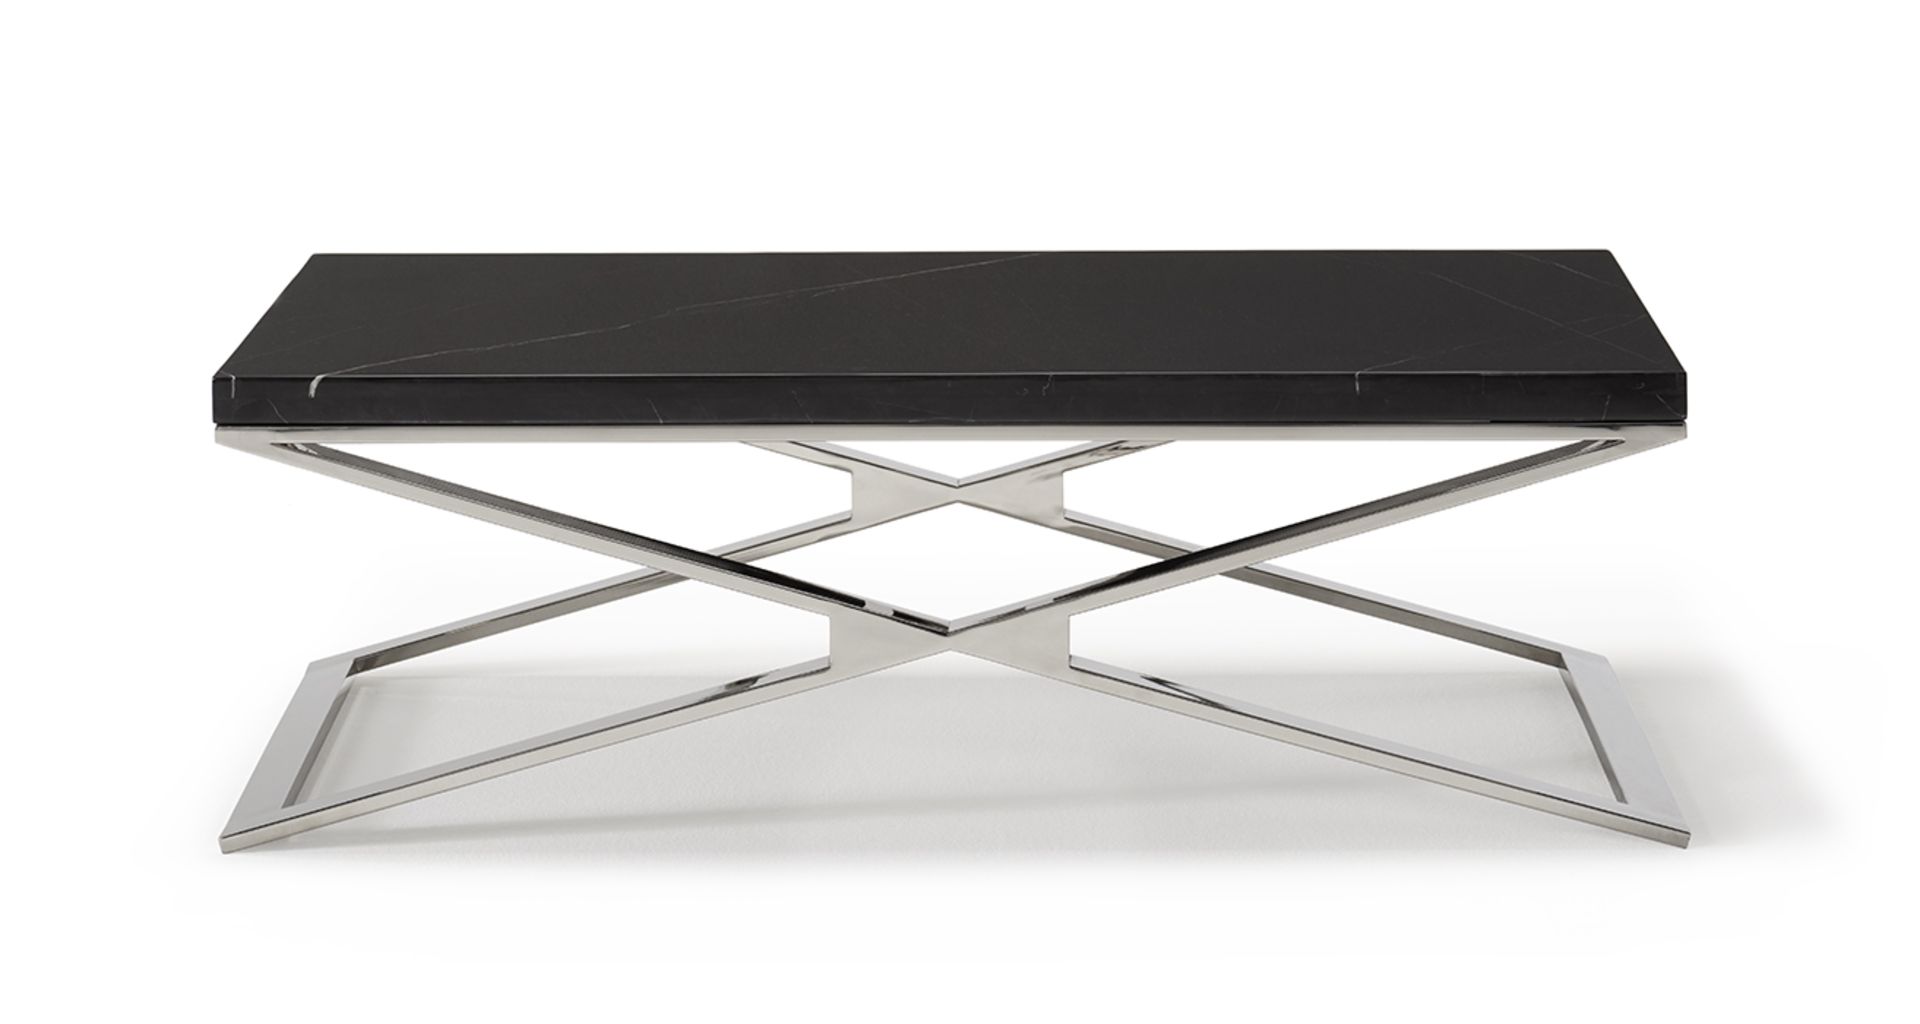 Zephyr Coffee Table by Kesterport This coffee Table has a classic frame design which we have updated - Bild 7 aus 7